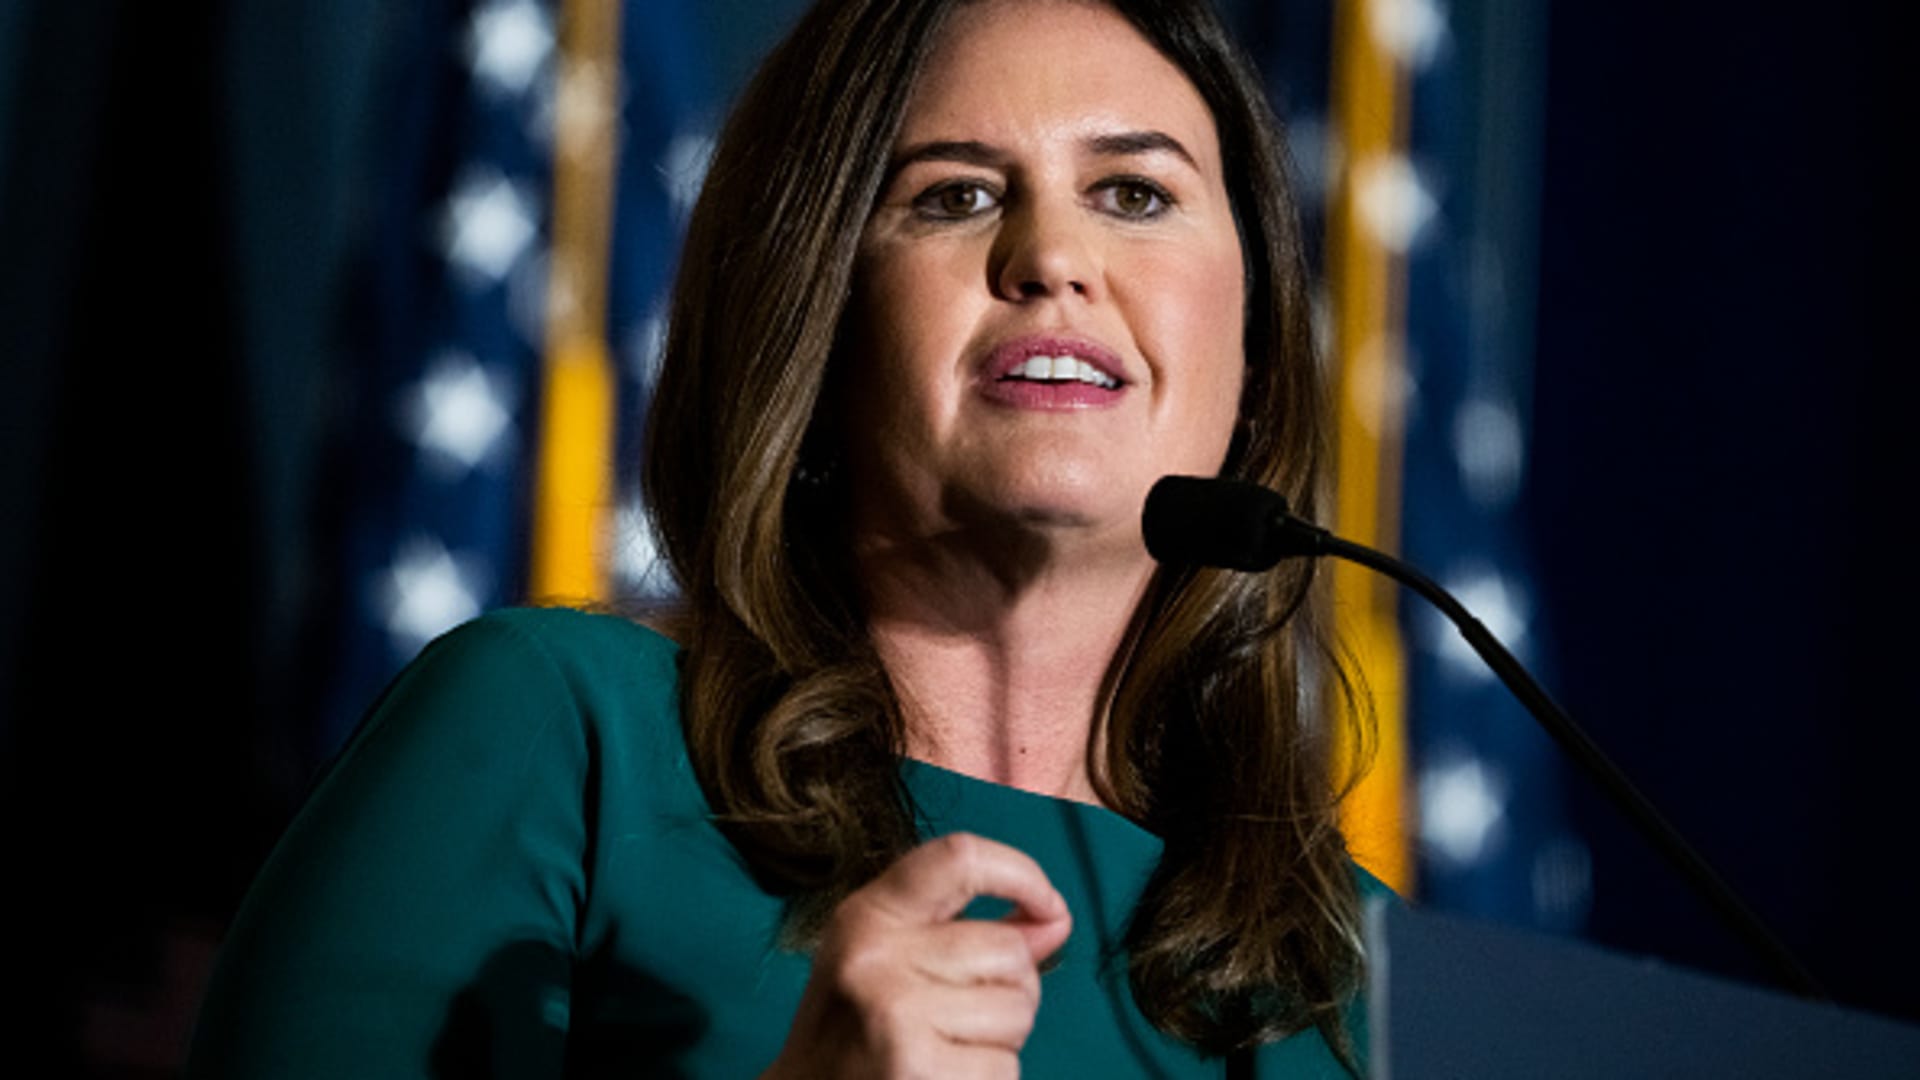 Sarah Huckabee Sanders, former Trump White House press secretary, addresses the America First Policy Institute's America First Agenda Summit at the Marriott Marquis on Tuesday, July 26, 2022.